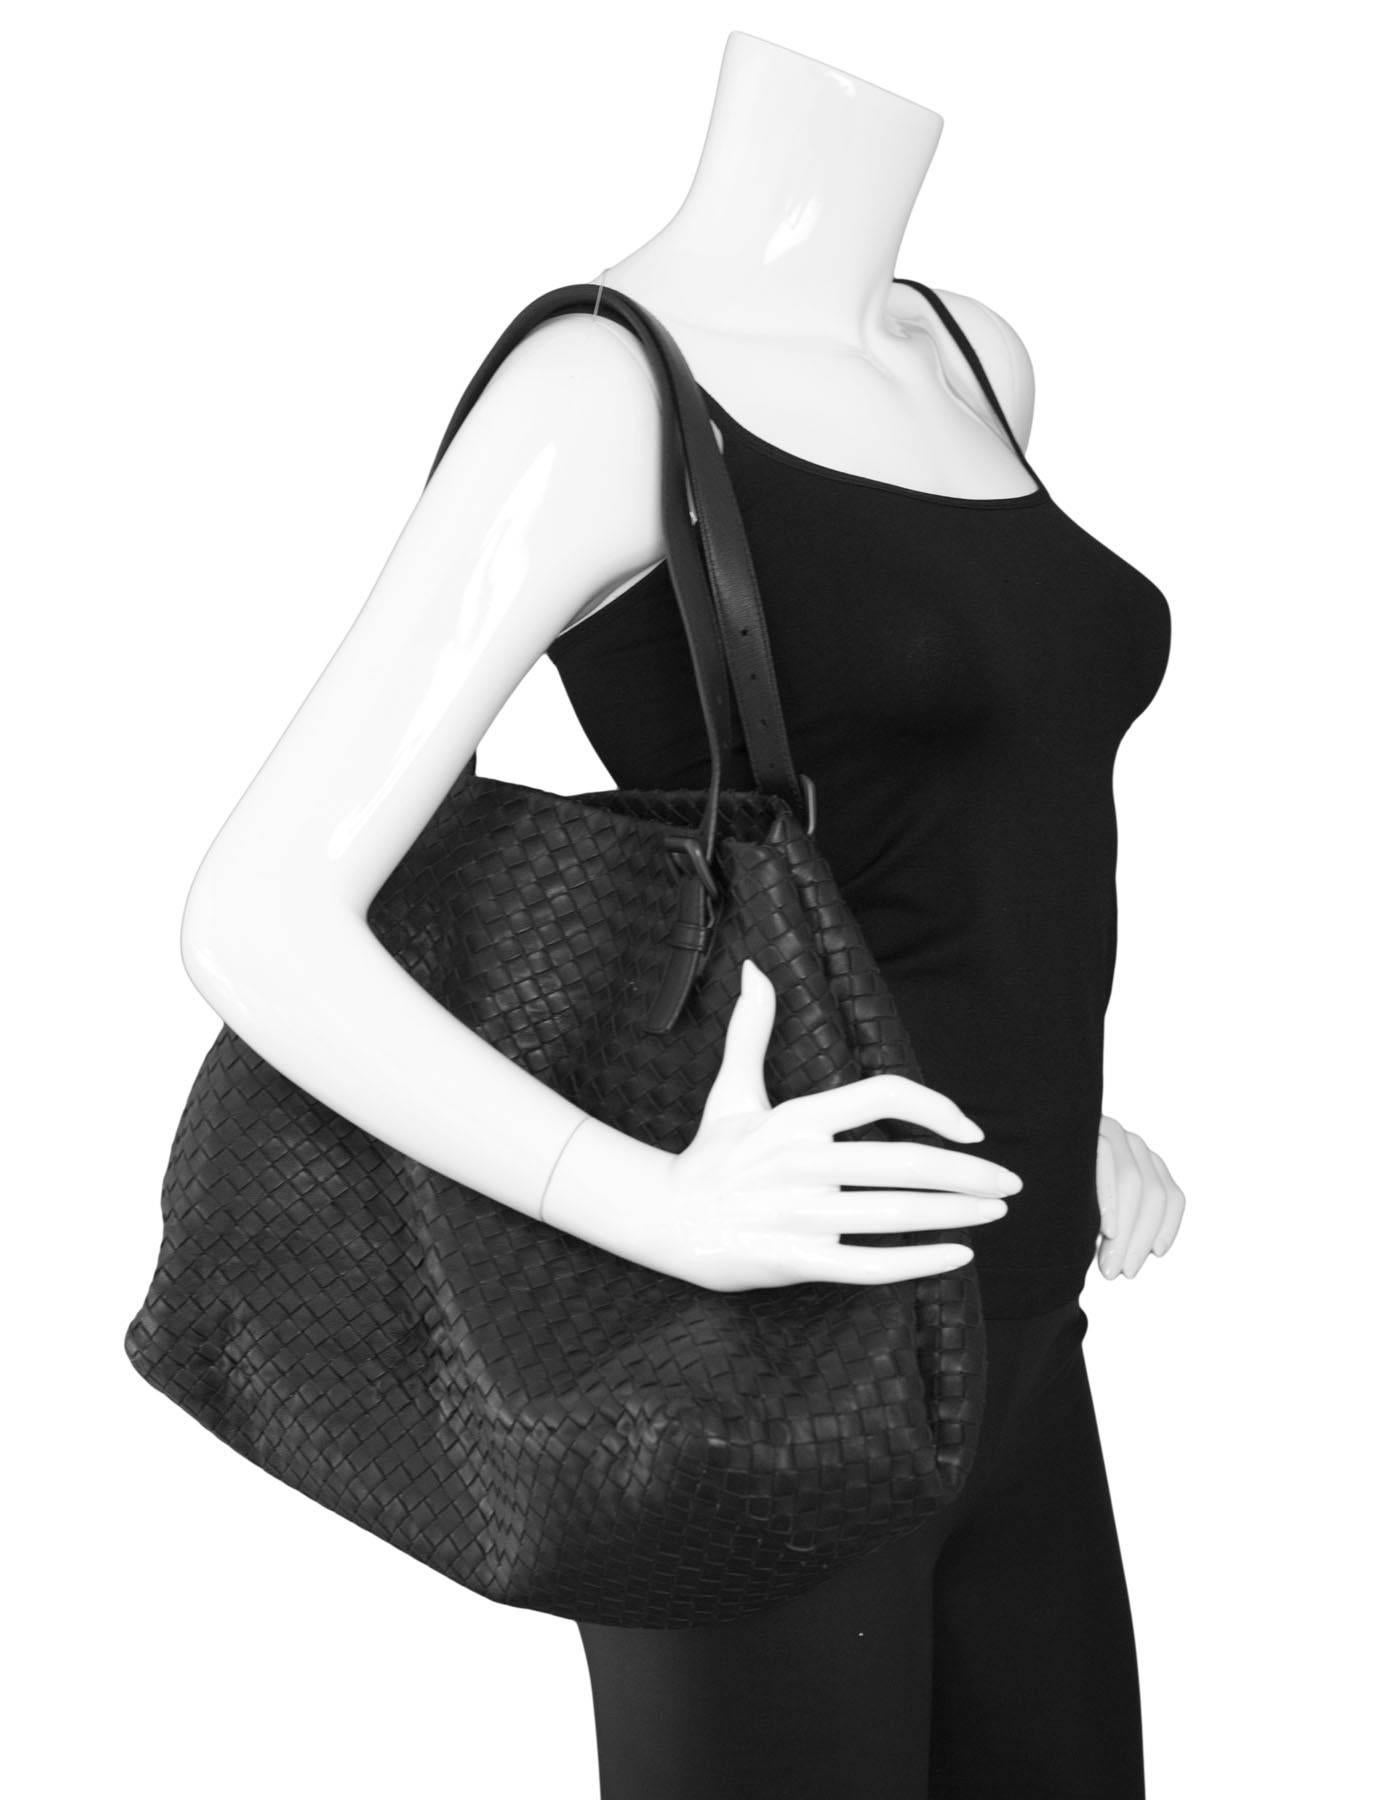 Bottega Veneta Black Intrecciato Large Tote Bag

Made In: Italy
Color: Black
Hardware: Black
Materials: Leather
Lining: Taupe suede
Closure/Opening: Open top with center hook closure
Exterior Pockets: None
Interior Pockets: One zip pocket and one